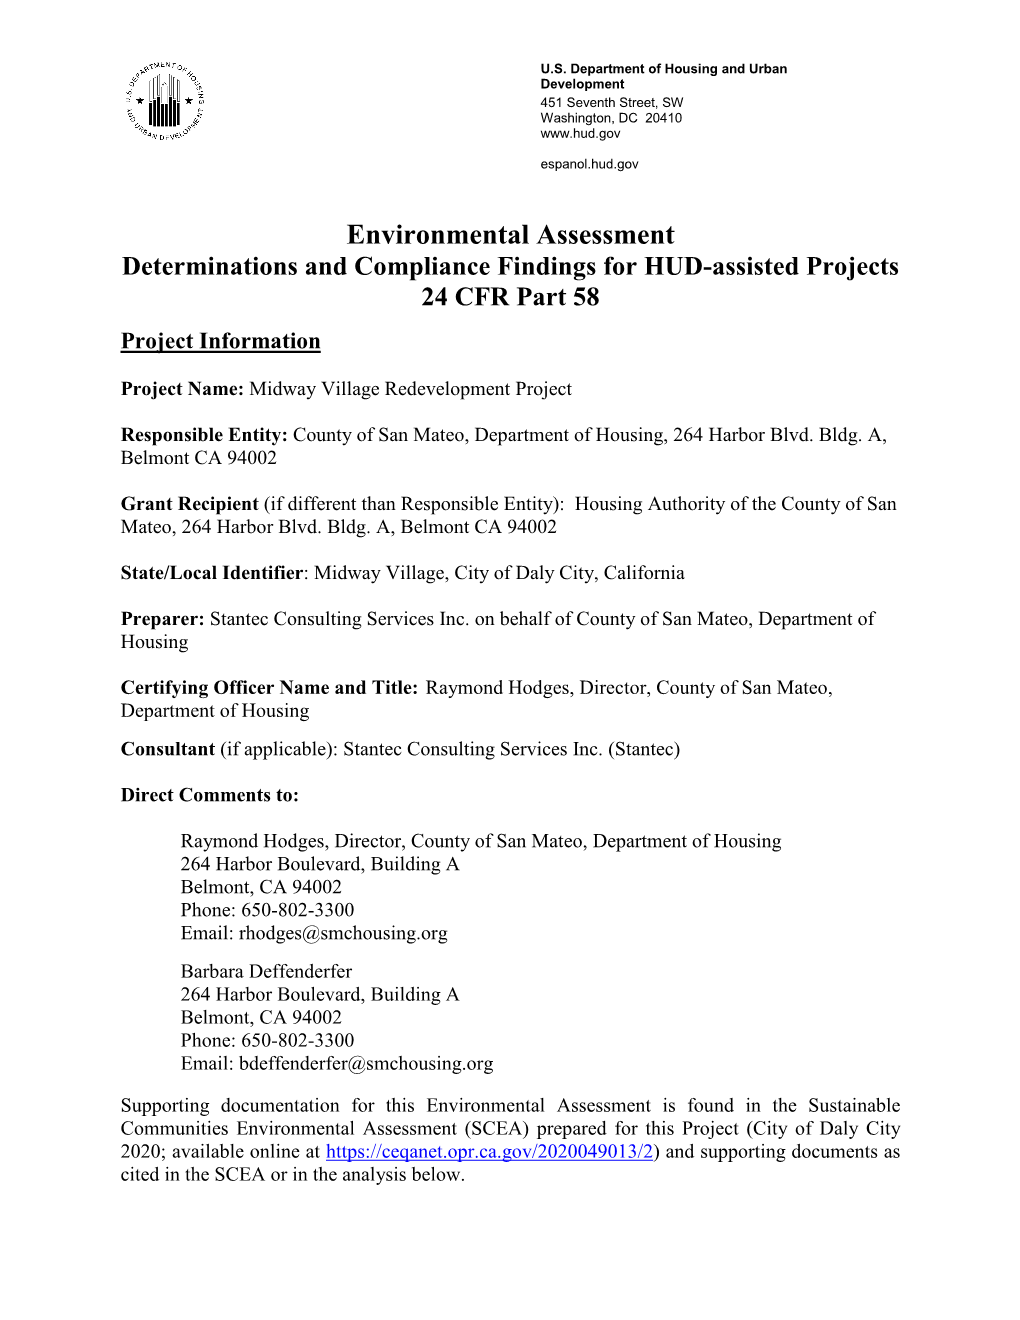 Environmental Assessment Determinations and Compliance Findings for HUD-Assisted Projects 24 CFR Part 58